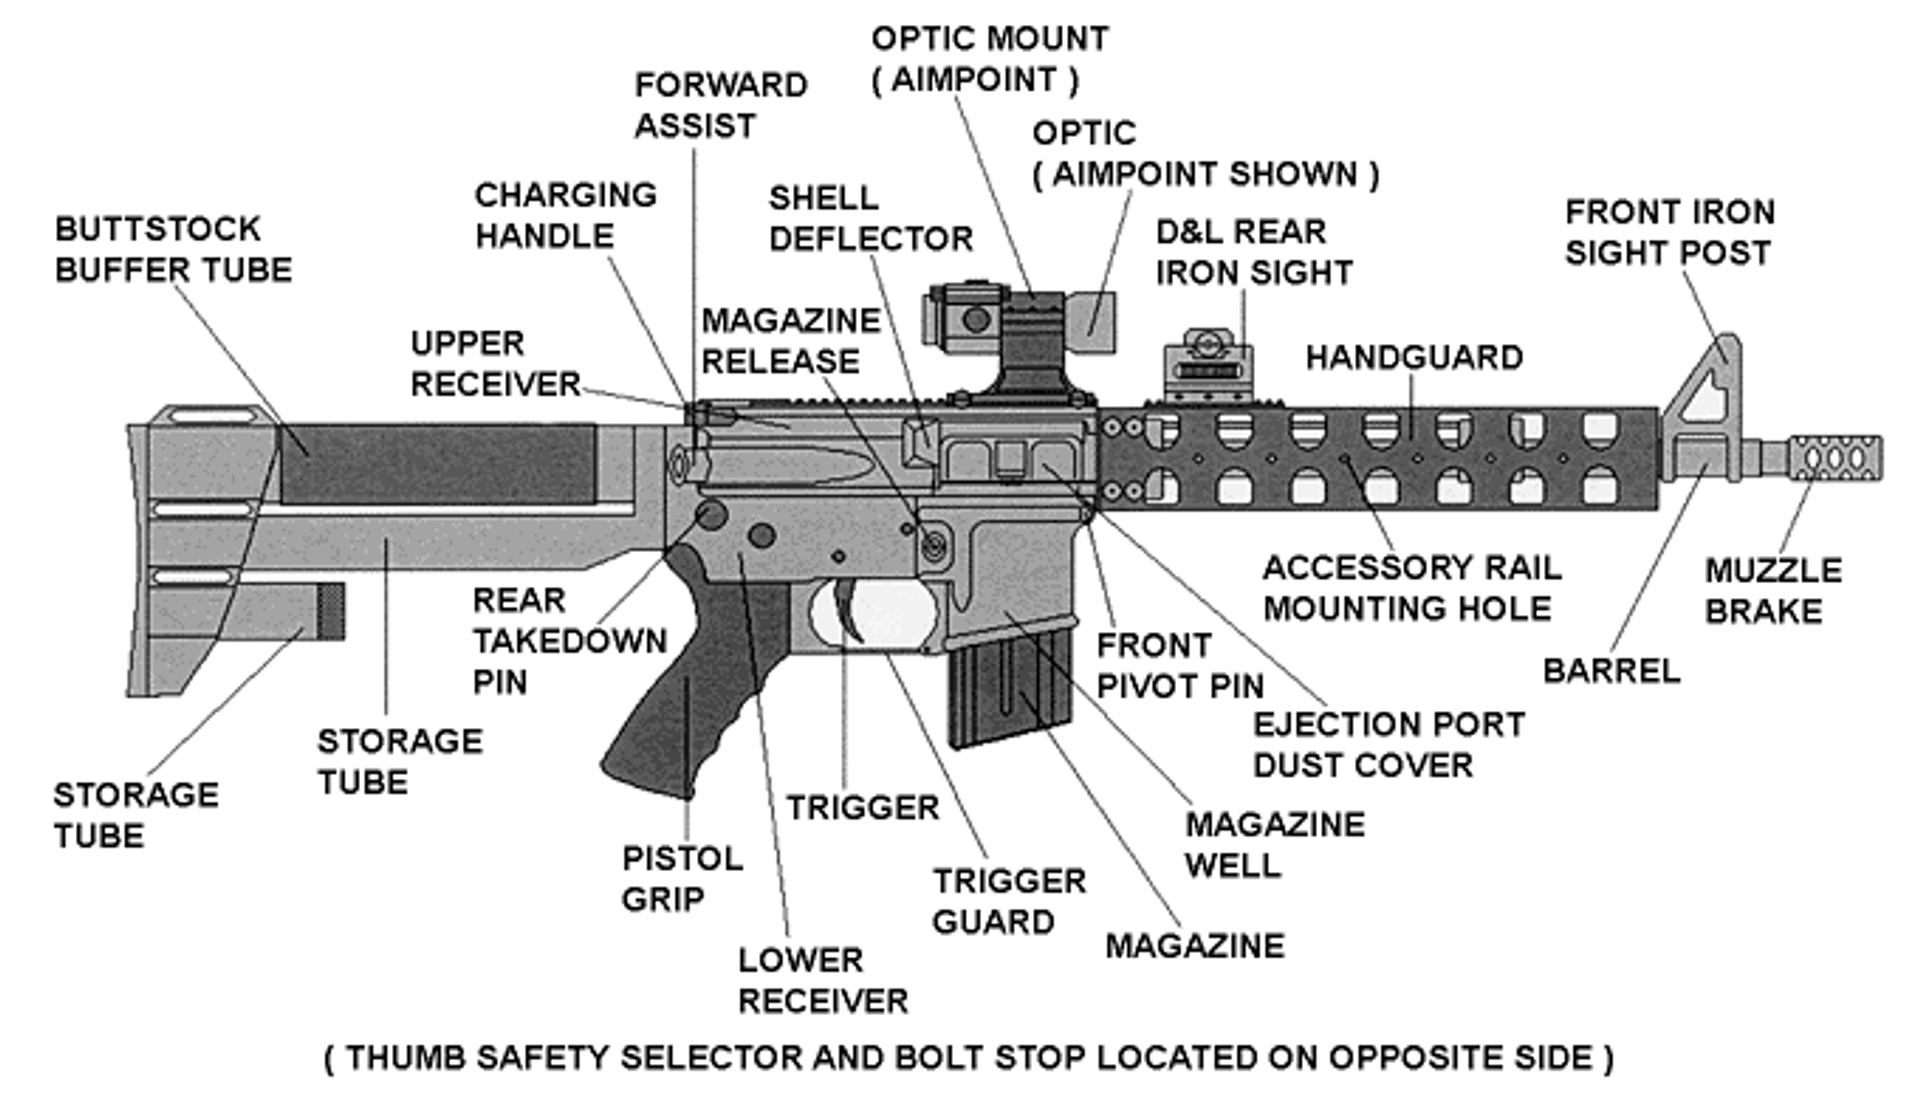 Building an AR-15 at Home: How-To Guide thumbnail image